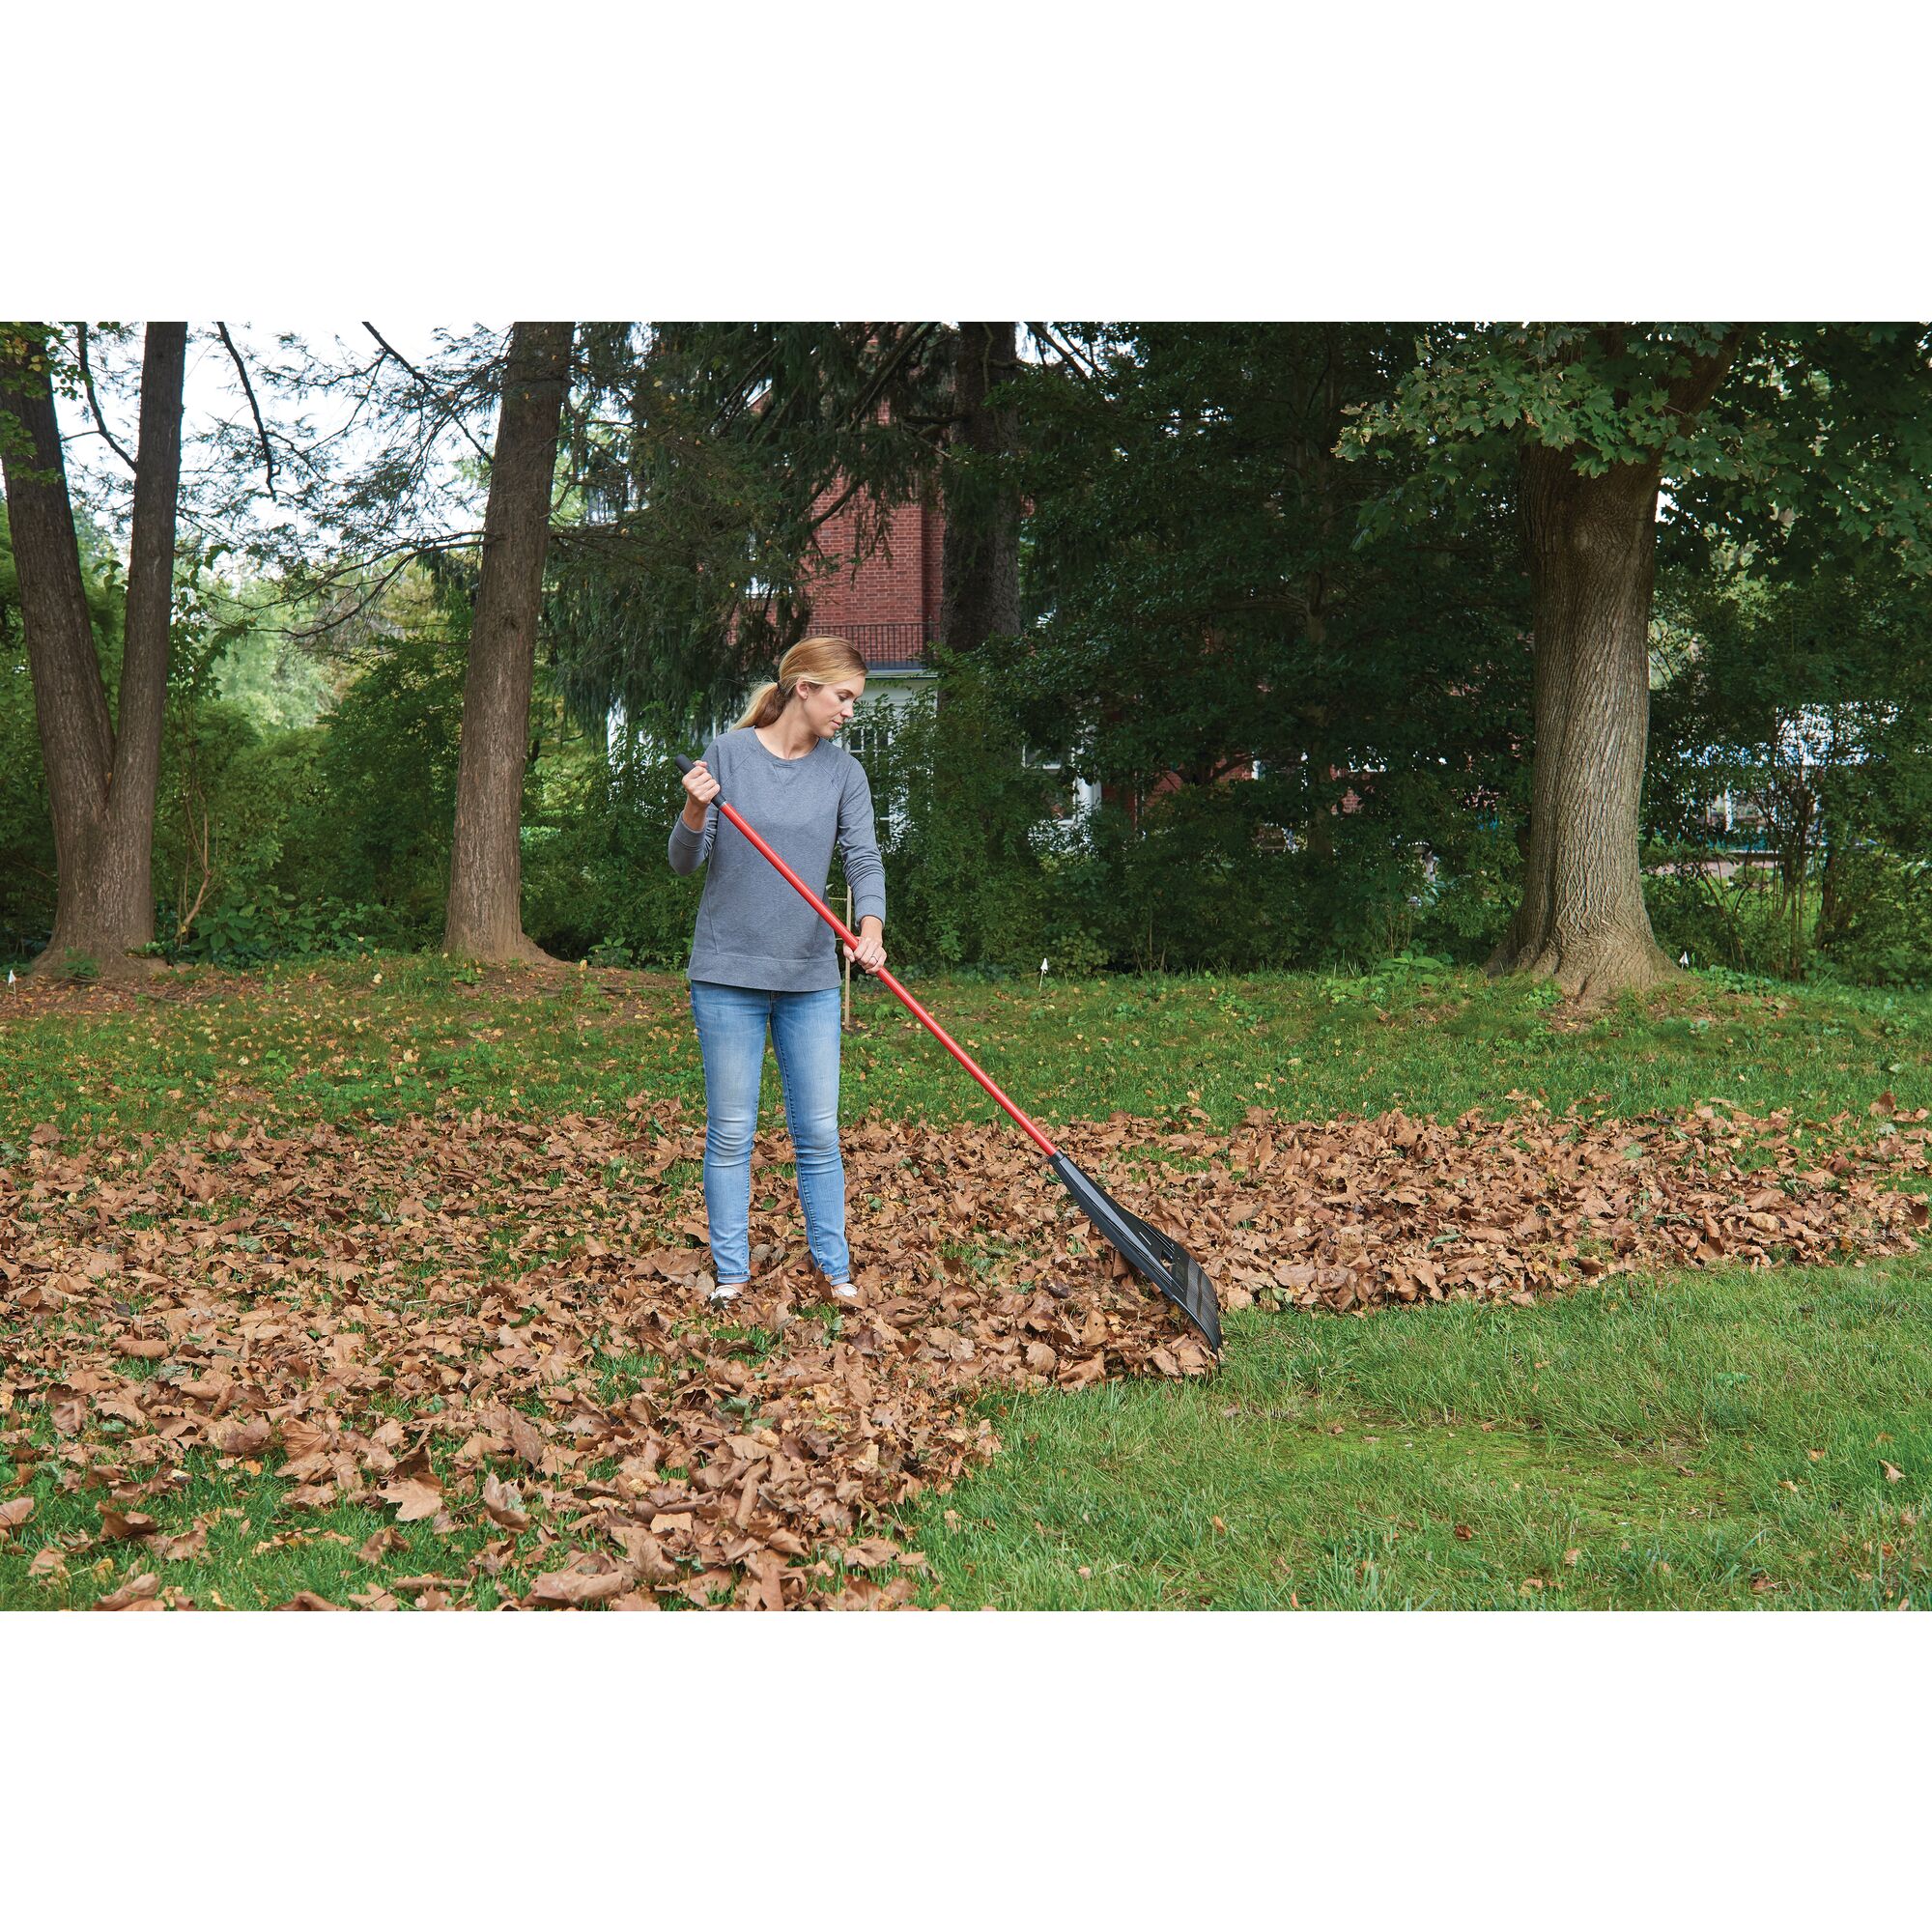 View of CRAFTSMAN 26-in. Dual Tine Leaf Rake being used by consumer